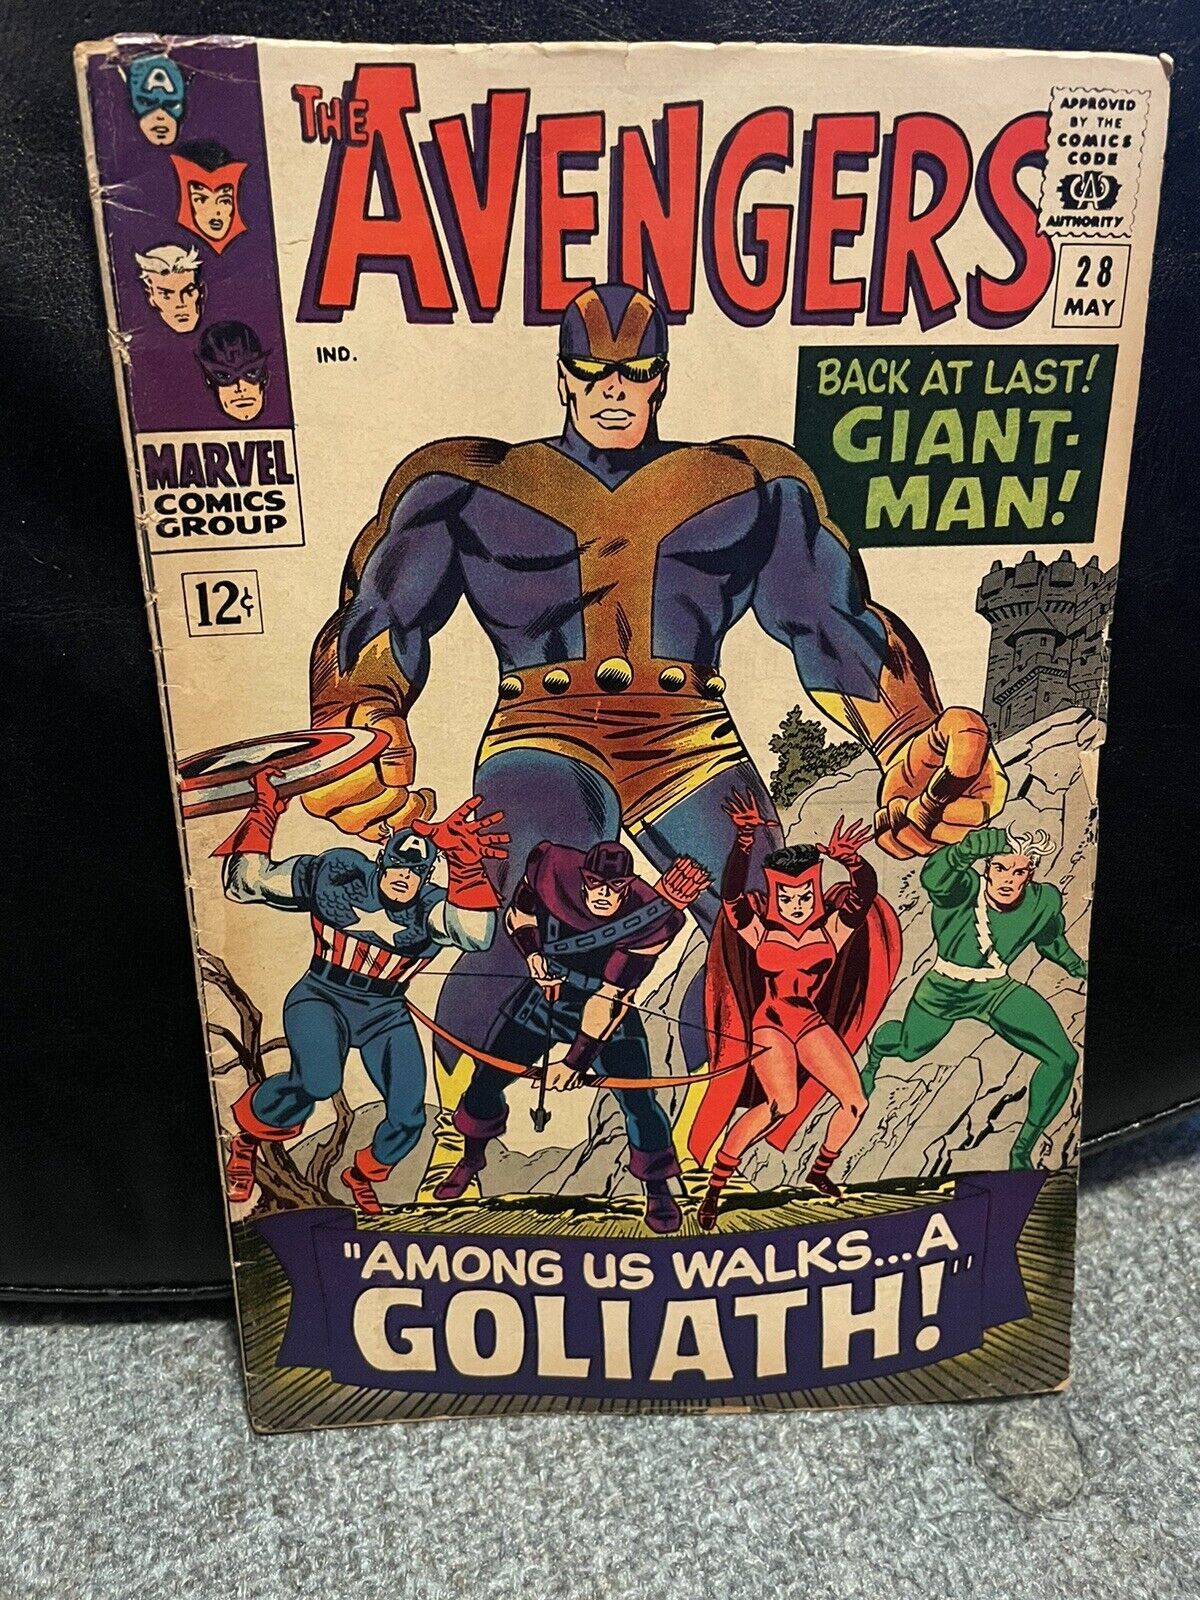 Avengers#28 1966 Giant Man Becomes Goliath.  Marvel Comics Fine condition